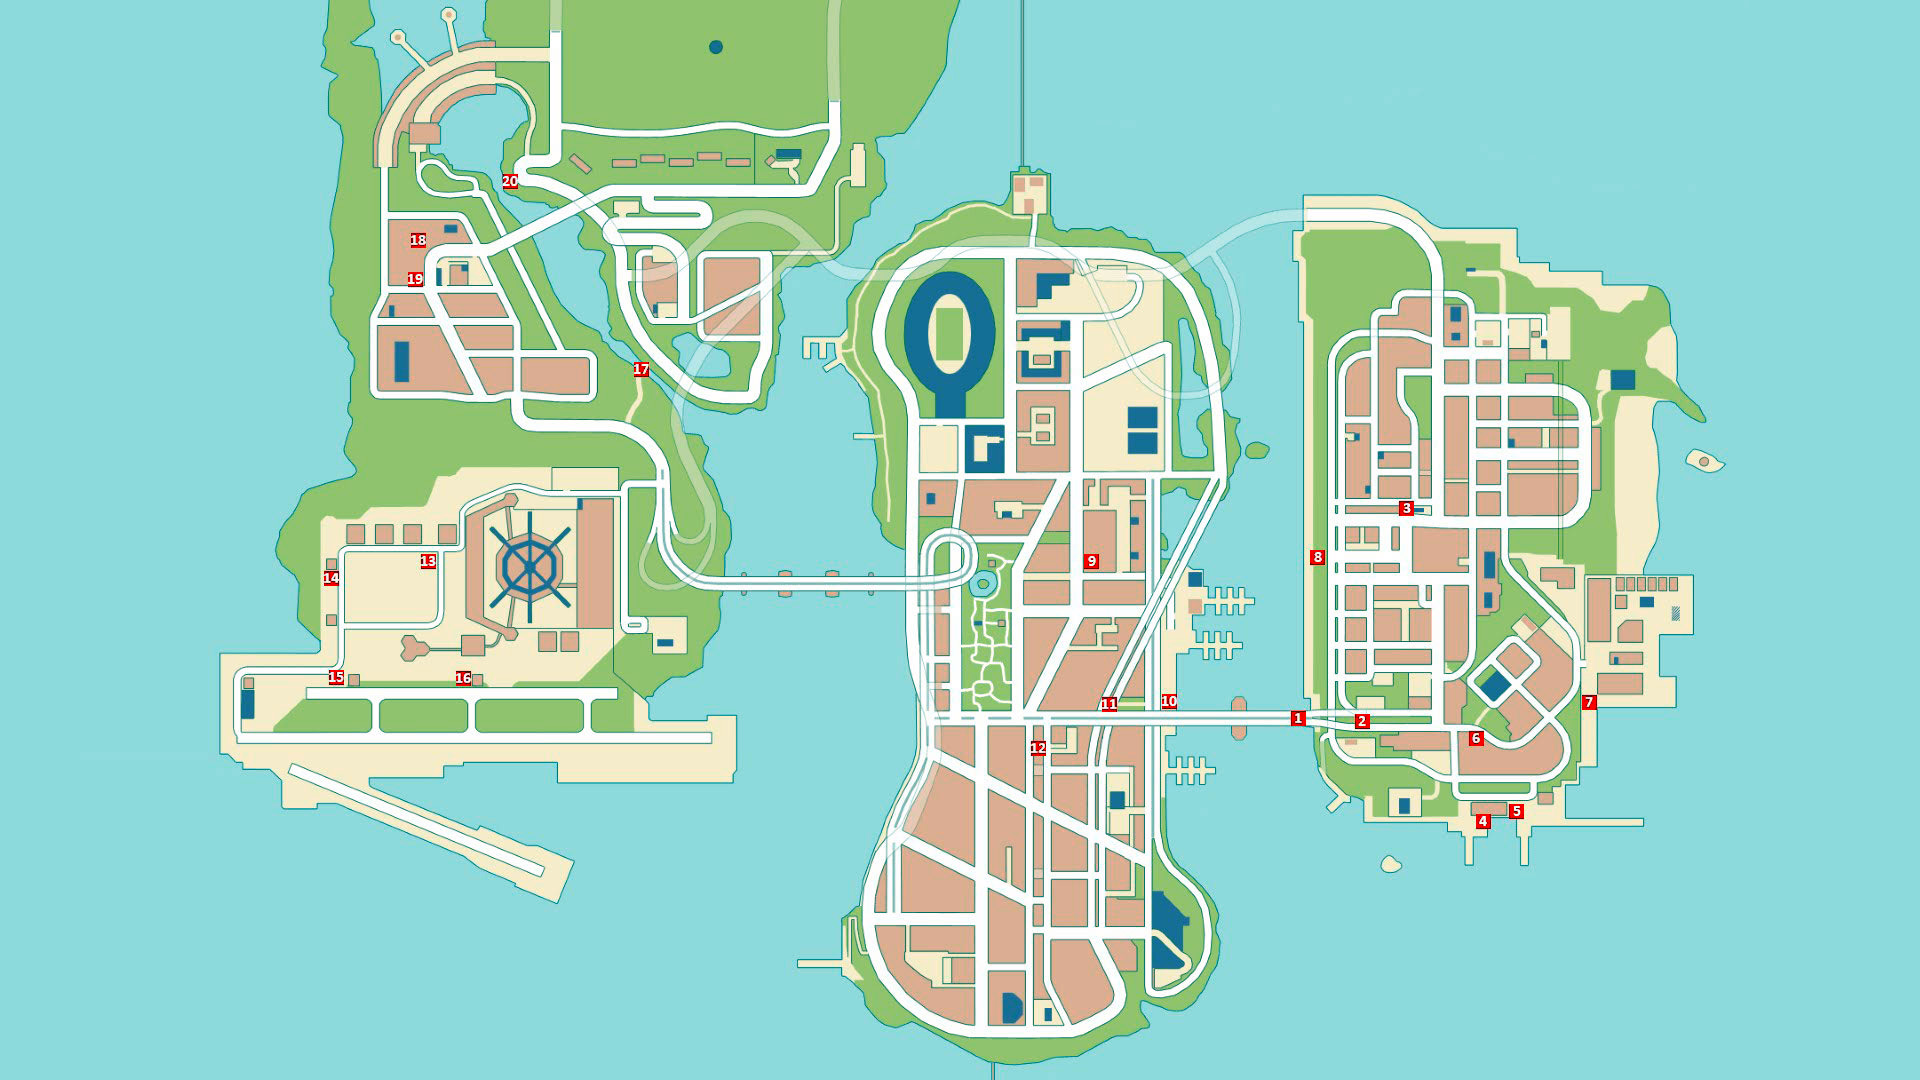 Large Map Of Gta 3 Games Mapsland Maps Of The World